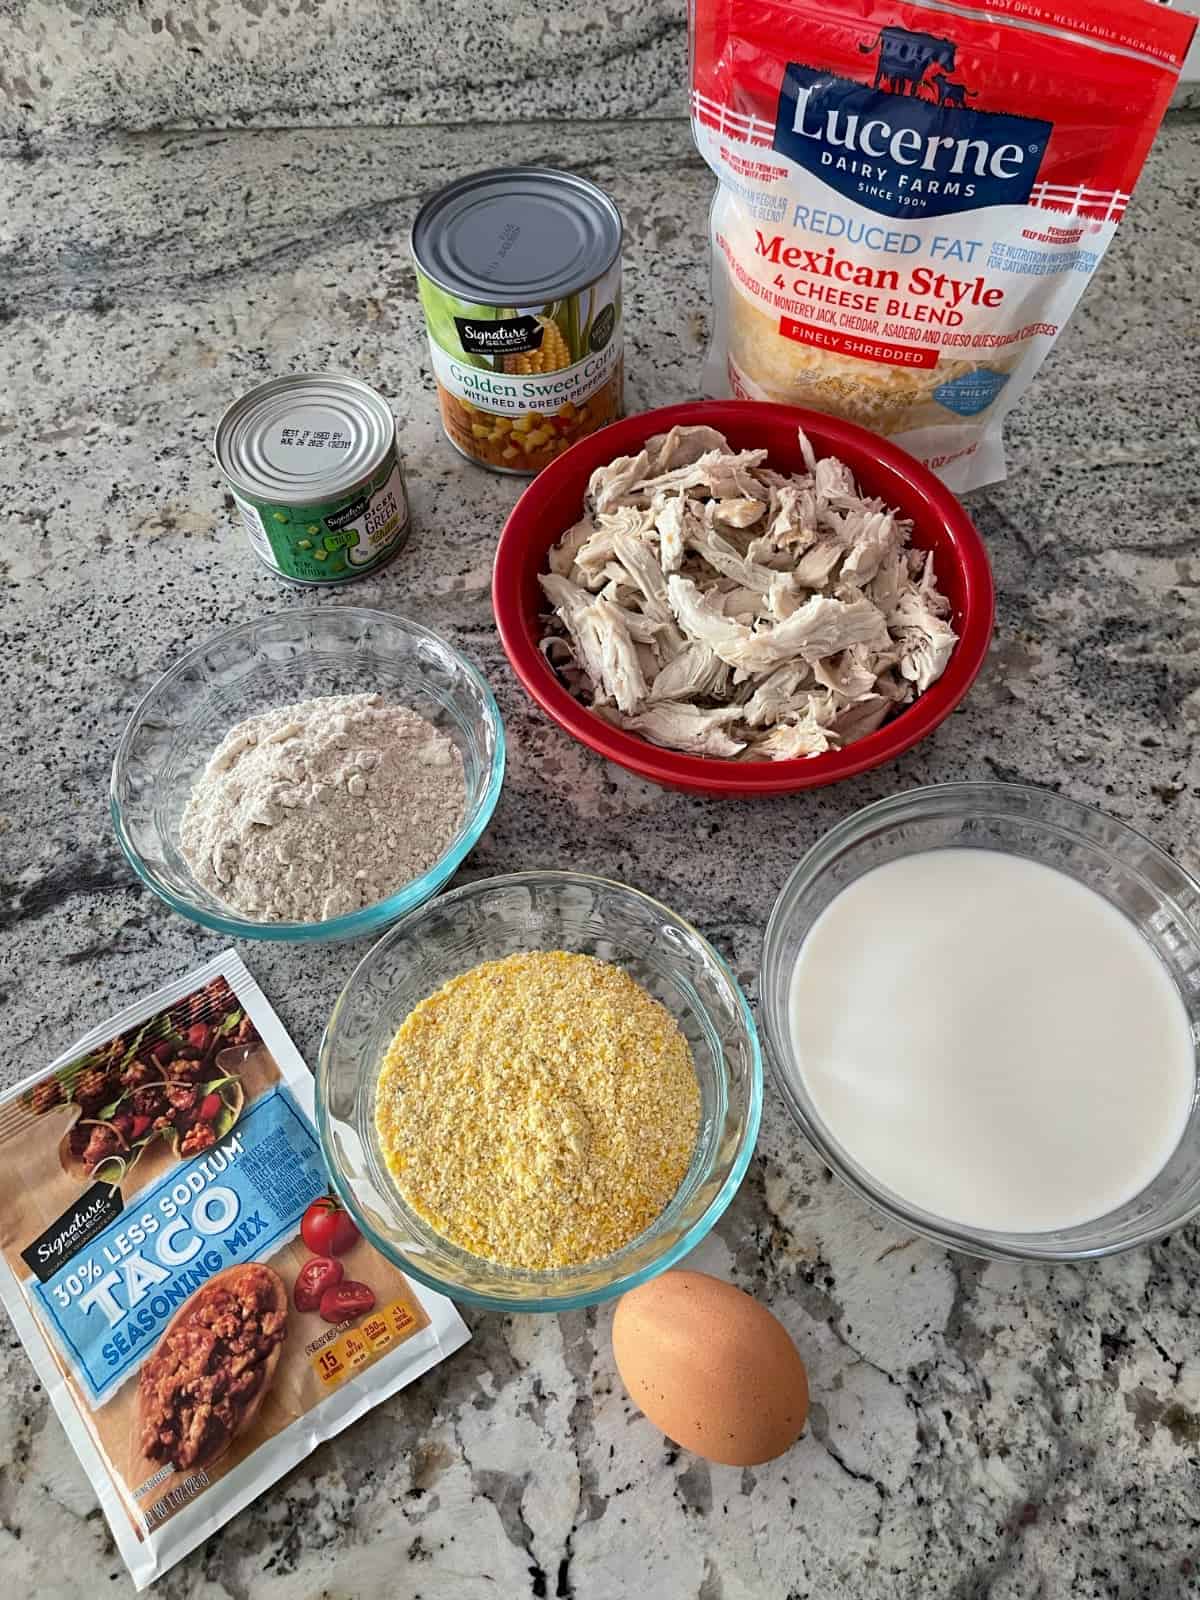 Ingredients including shredded cheese, chicken, canned corn, chopped green chiles, Bisquick, cornmeal, milk, egg and reduced sodium taco seasoning mix.